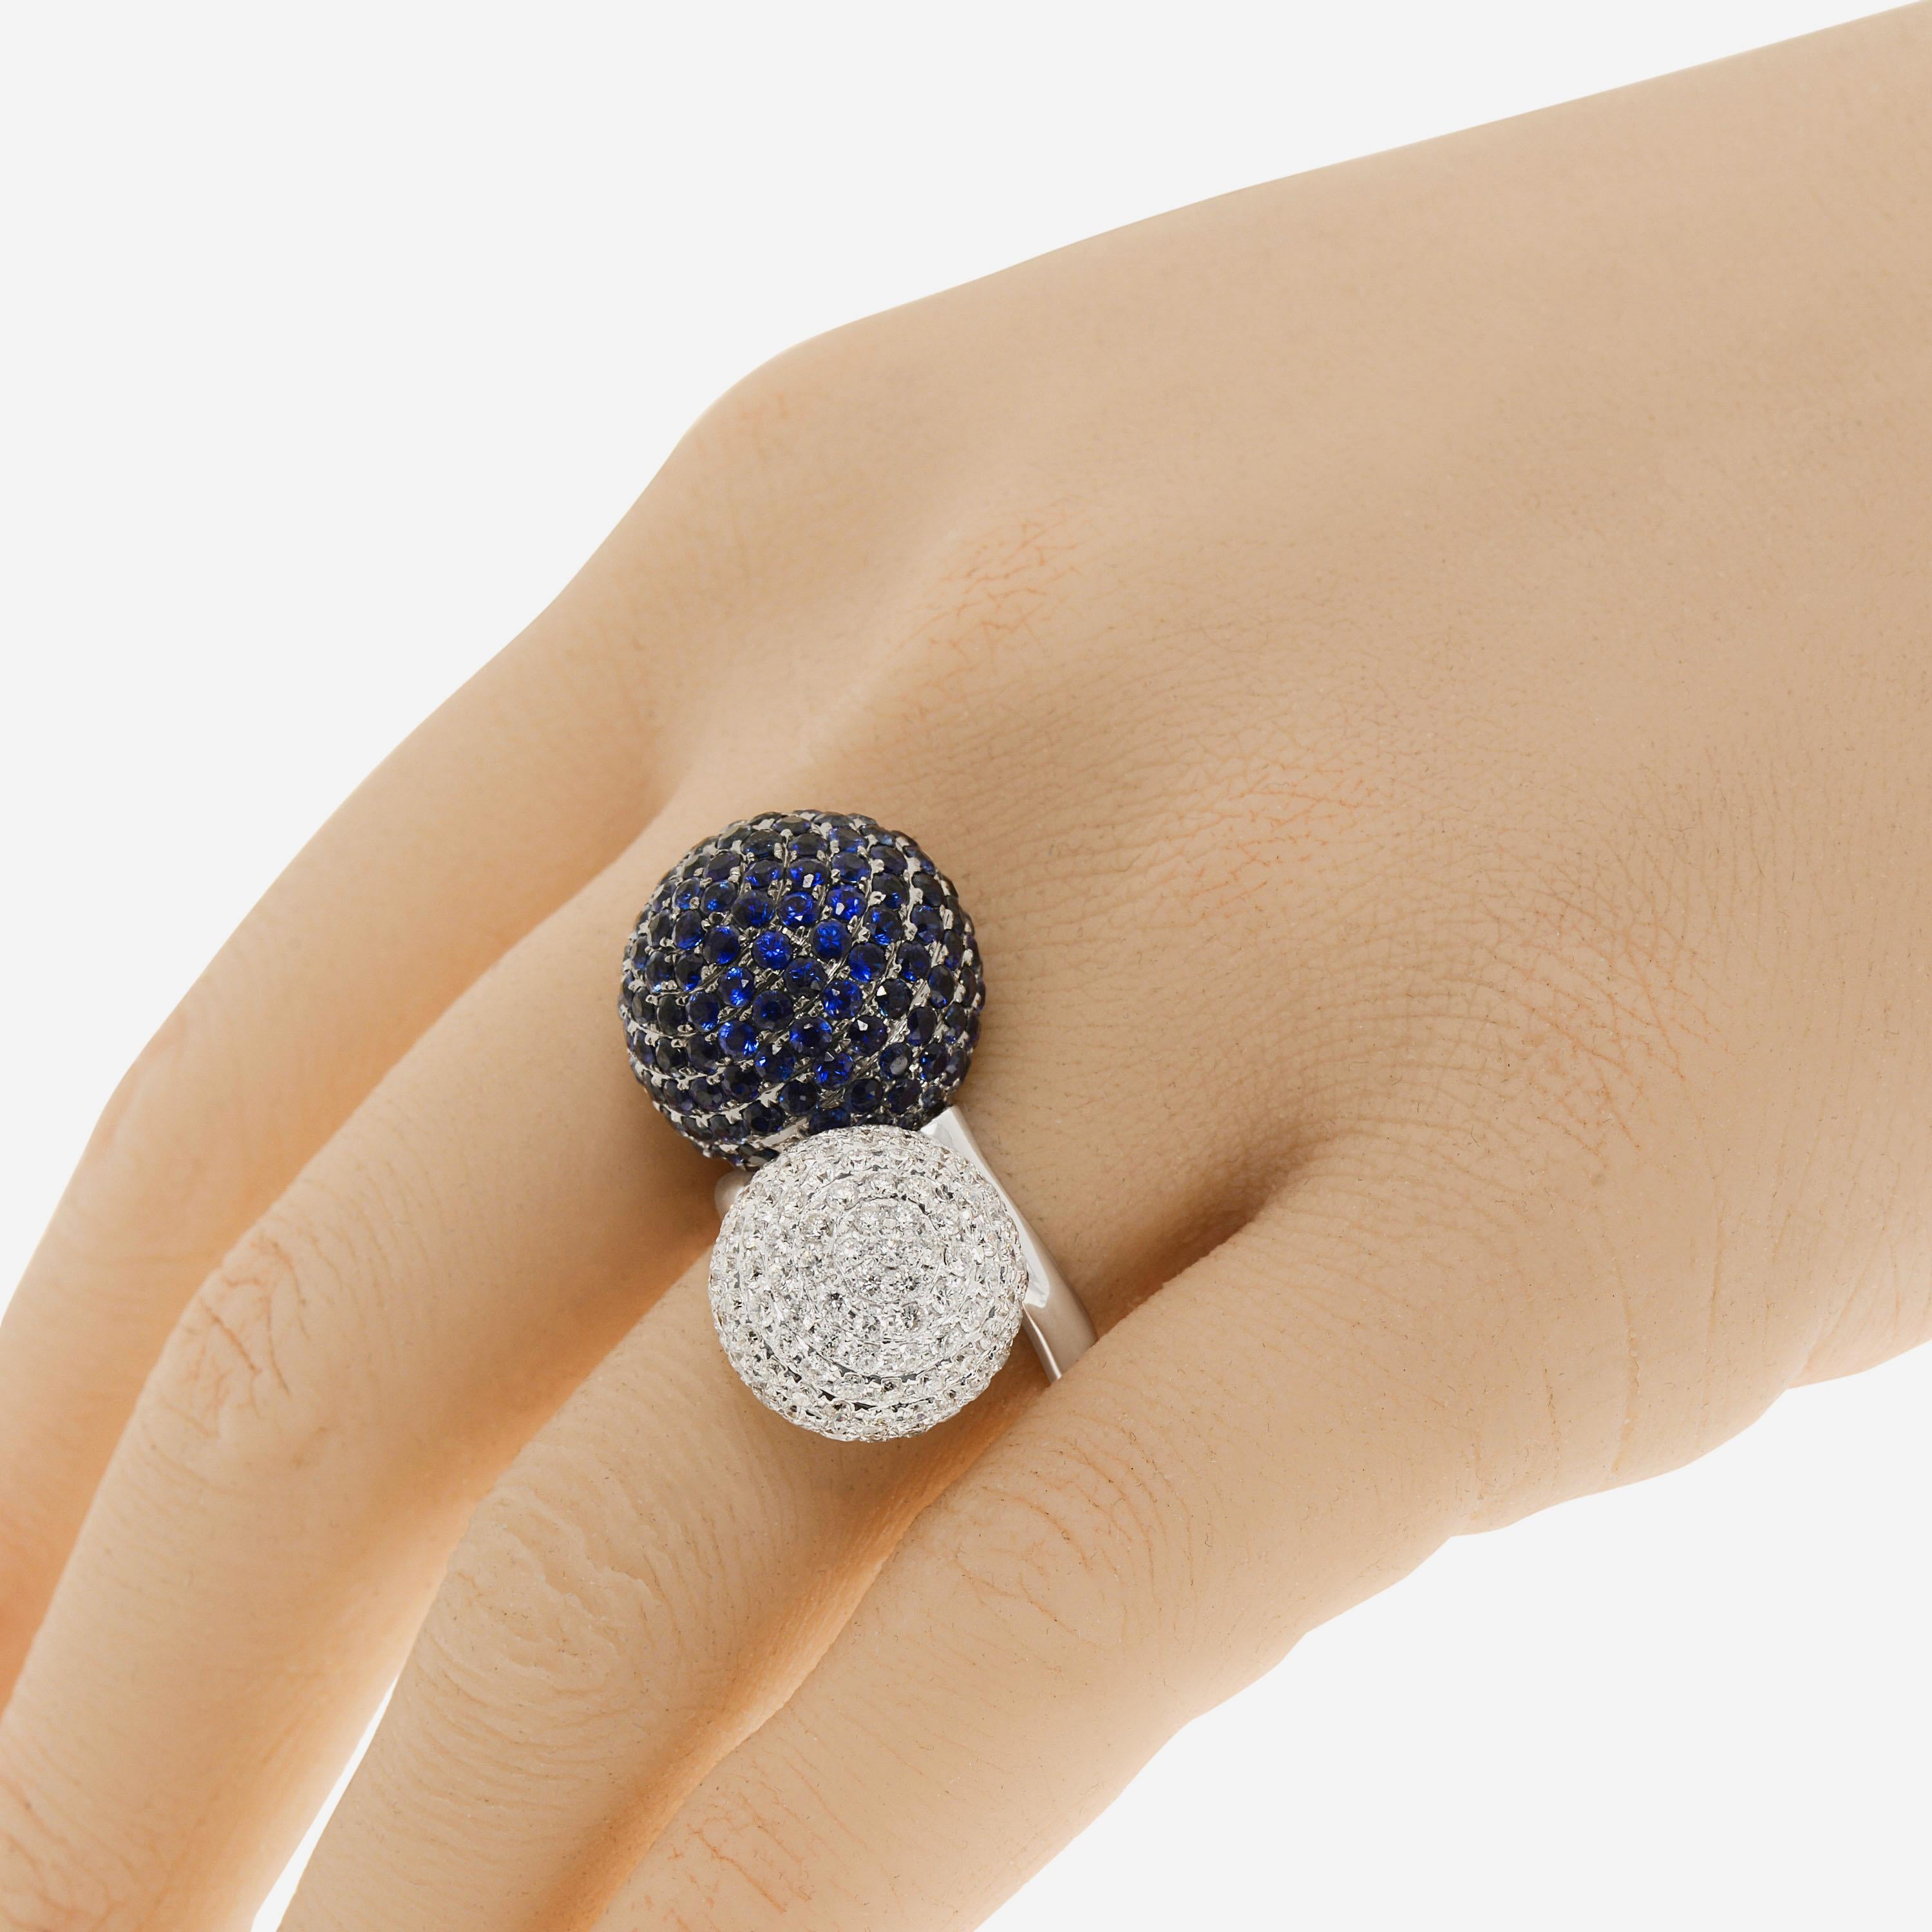 Zydo 18K white gold statement ring features two oversized spherical details clustered with 6.63ct. tw. sapphire and 2.67ct. tw. diamonds. The ring size is 6.5 (53.1). The decoration size is 1